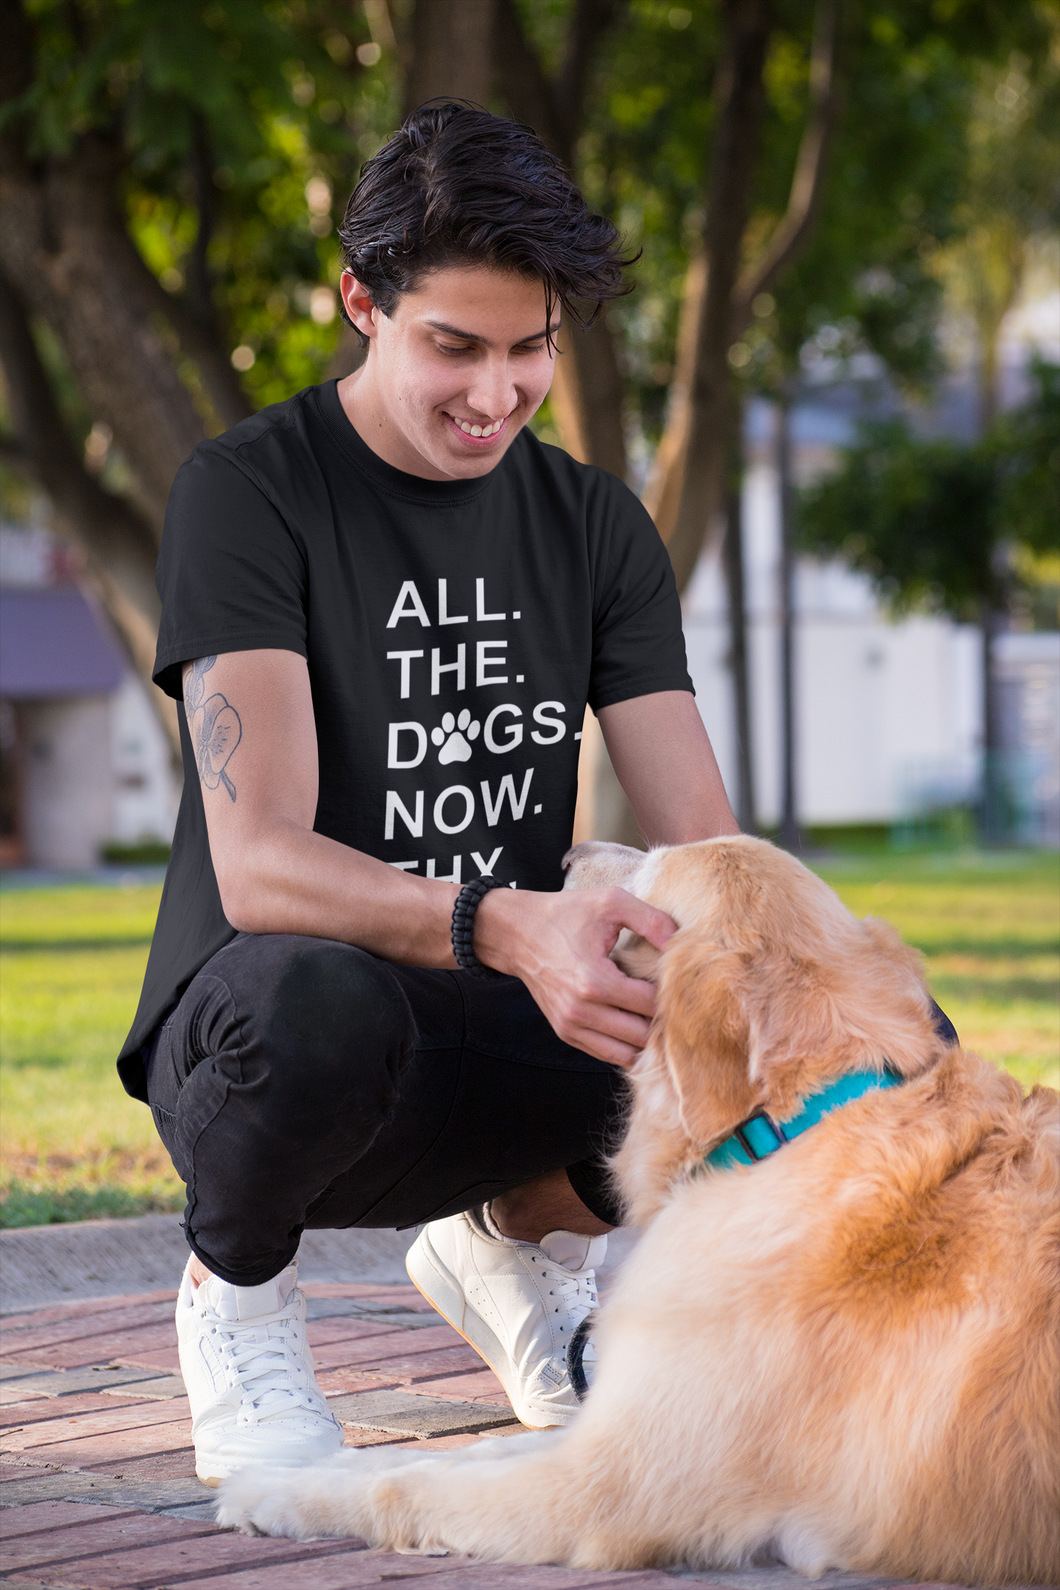 All the Dogs. Now. - Men's/Unisex T-shirt or Women's T-shirt